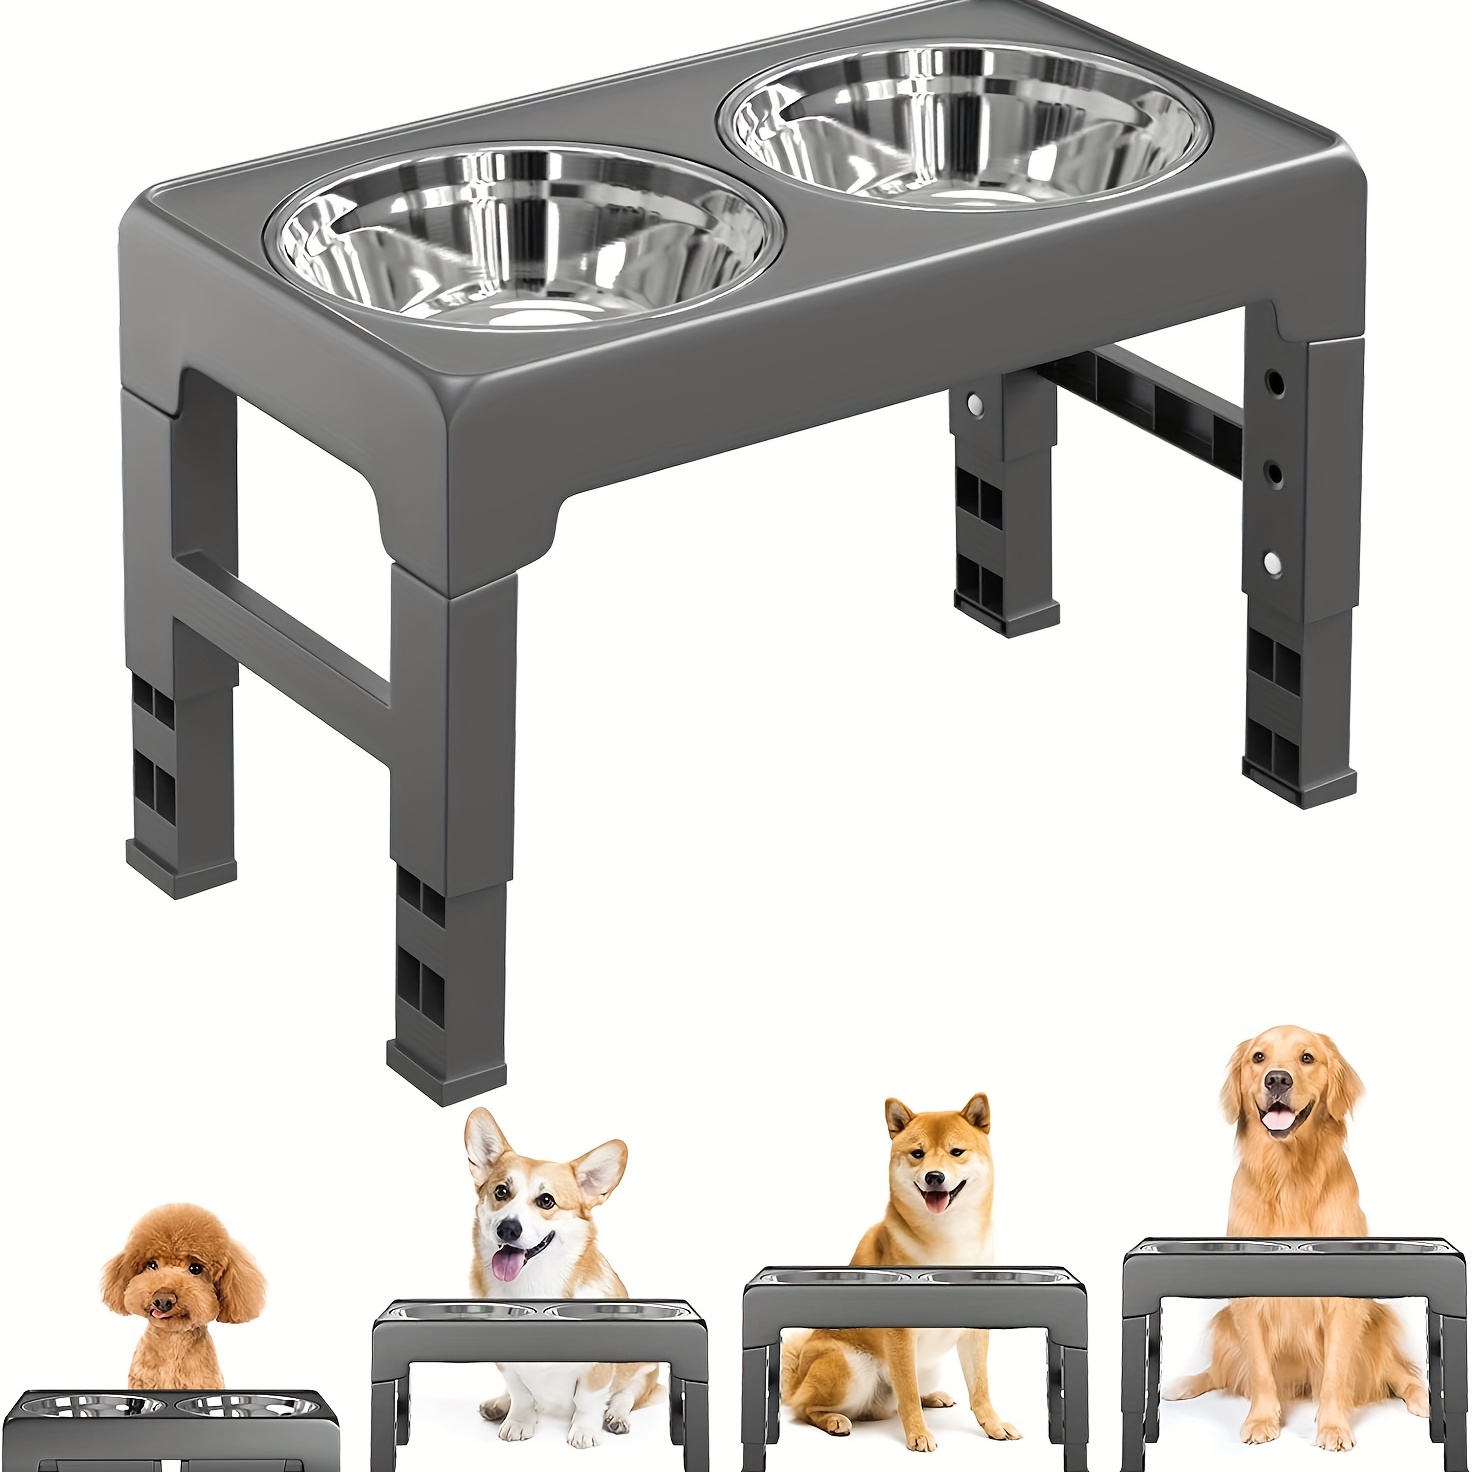 Pet Supplies : Elevated Dog Bowl for Large Dogs,Raised Dog Bowl  Stand,Adjusts to 8 Heights (2.75- 20) Dog Feeding Station with 2  Stainless Steel Dog Bowls,for Small Medium Large Dogs and Pets 